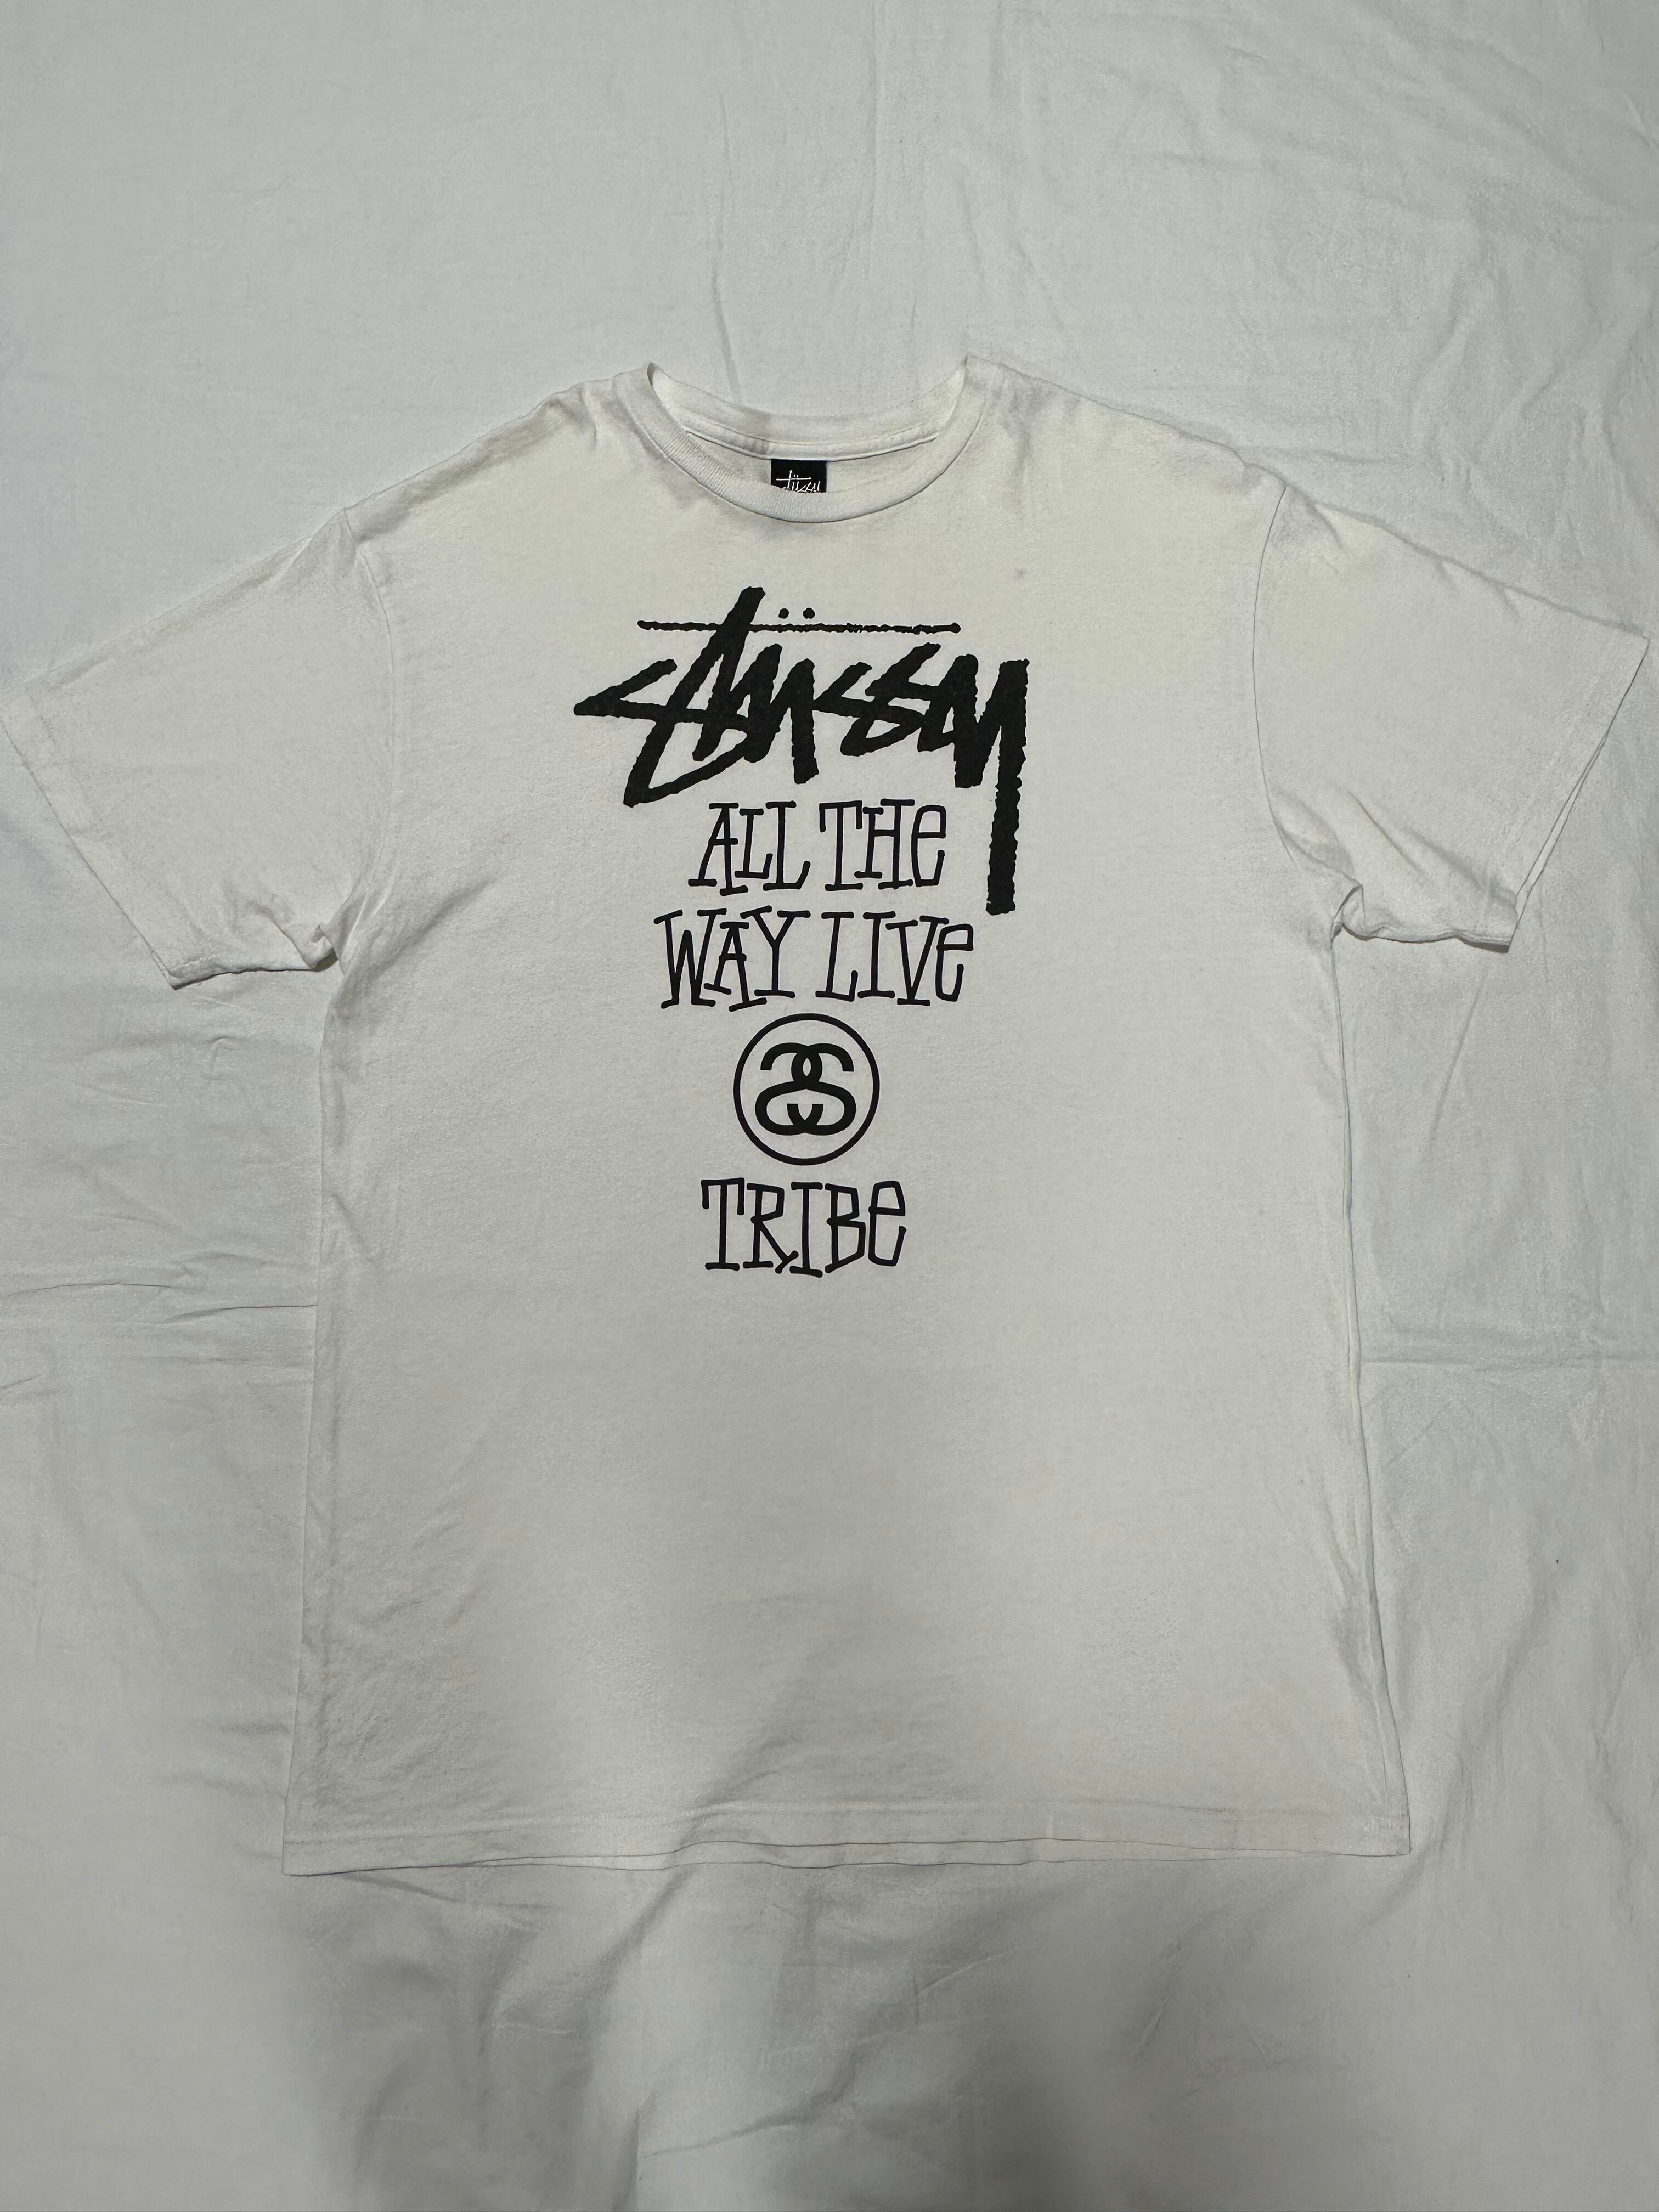 STUSSY ALL THE WAY LIVE TRIBE TEE .XL | Lookin'4